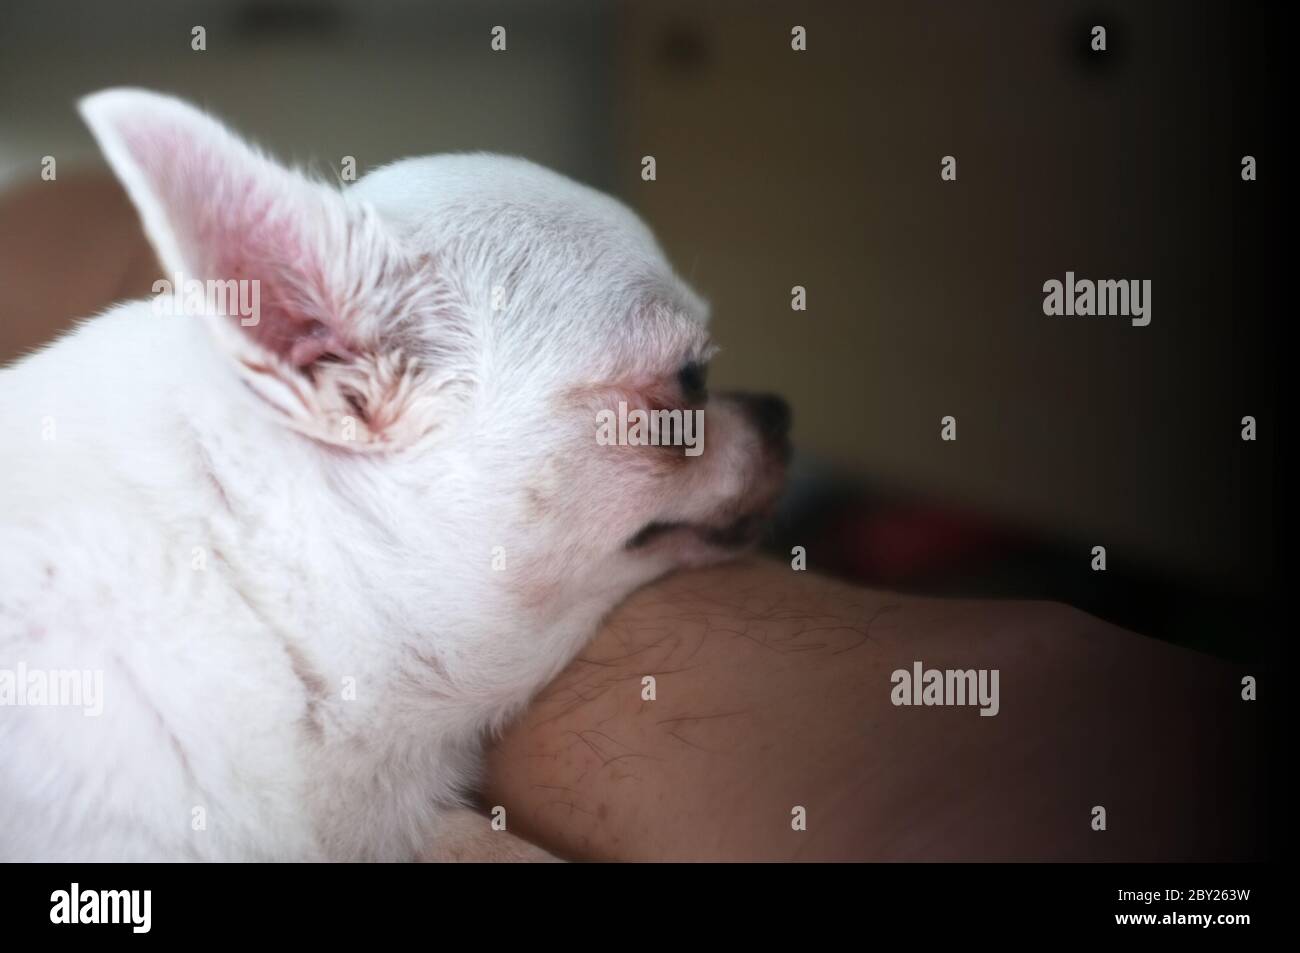 Chihua-hua is resting for man owner petting his pet, Close up. Concept Dog lover Stock Photo